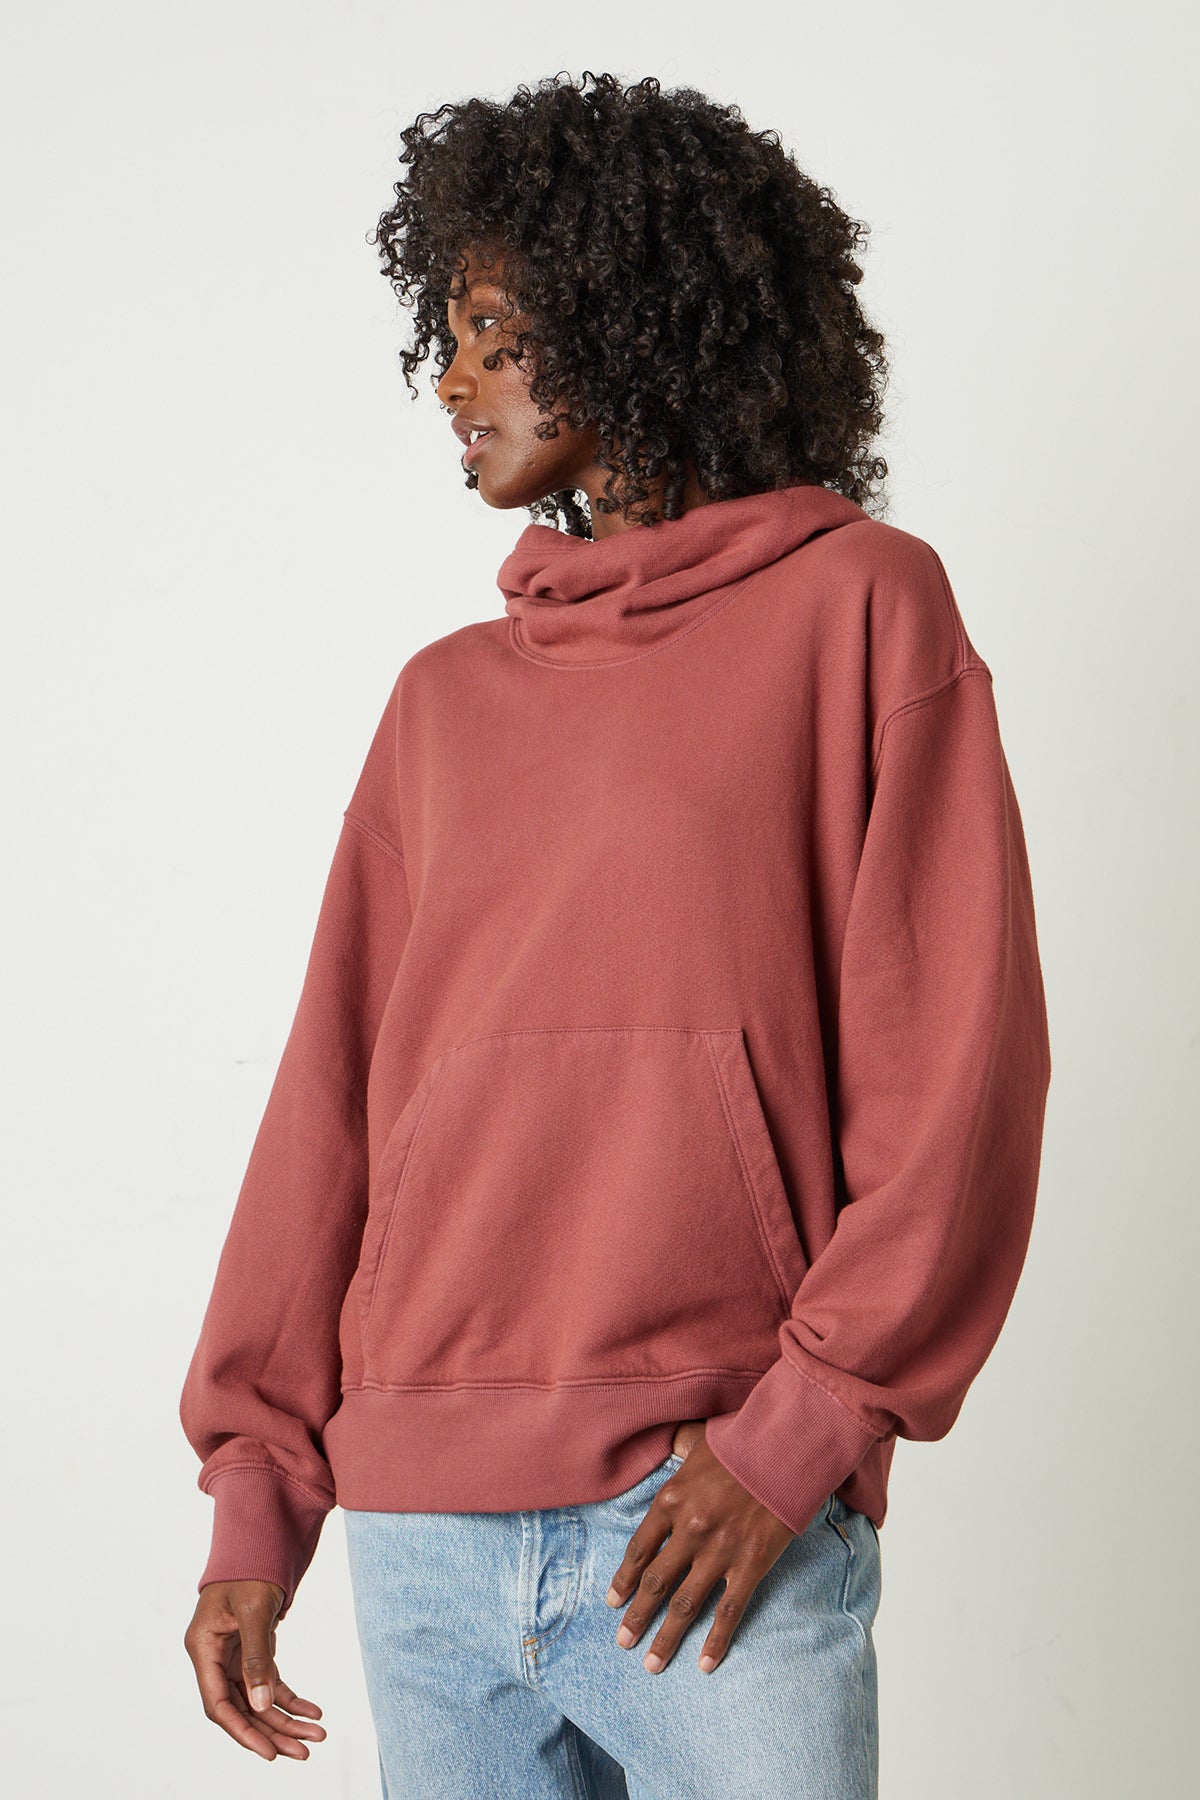 Do you think the whole jersey over hoodies / sweater look is strange?